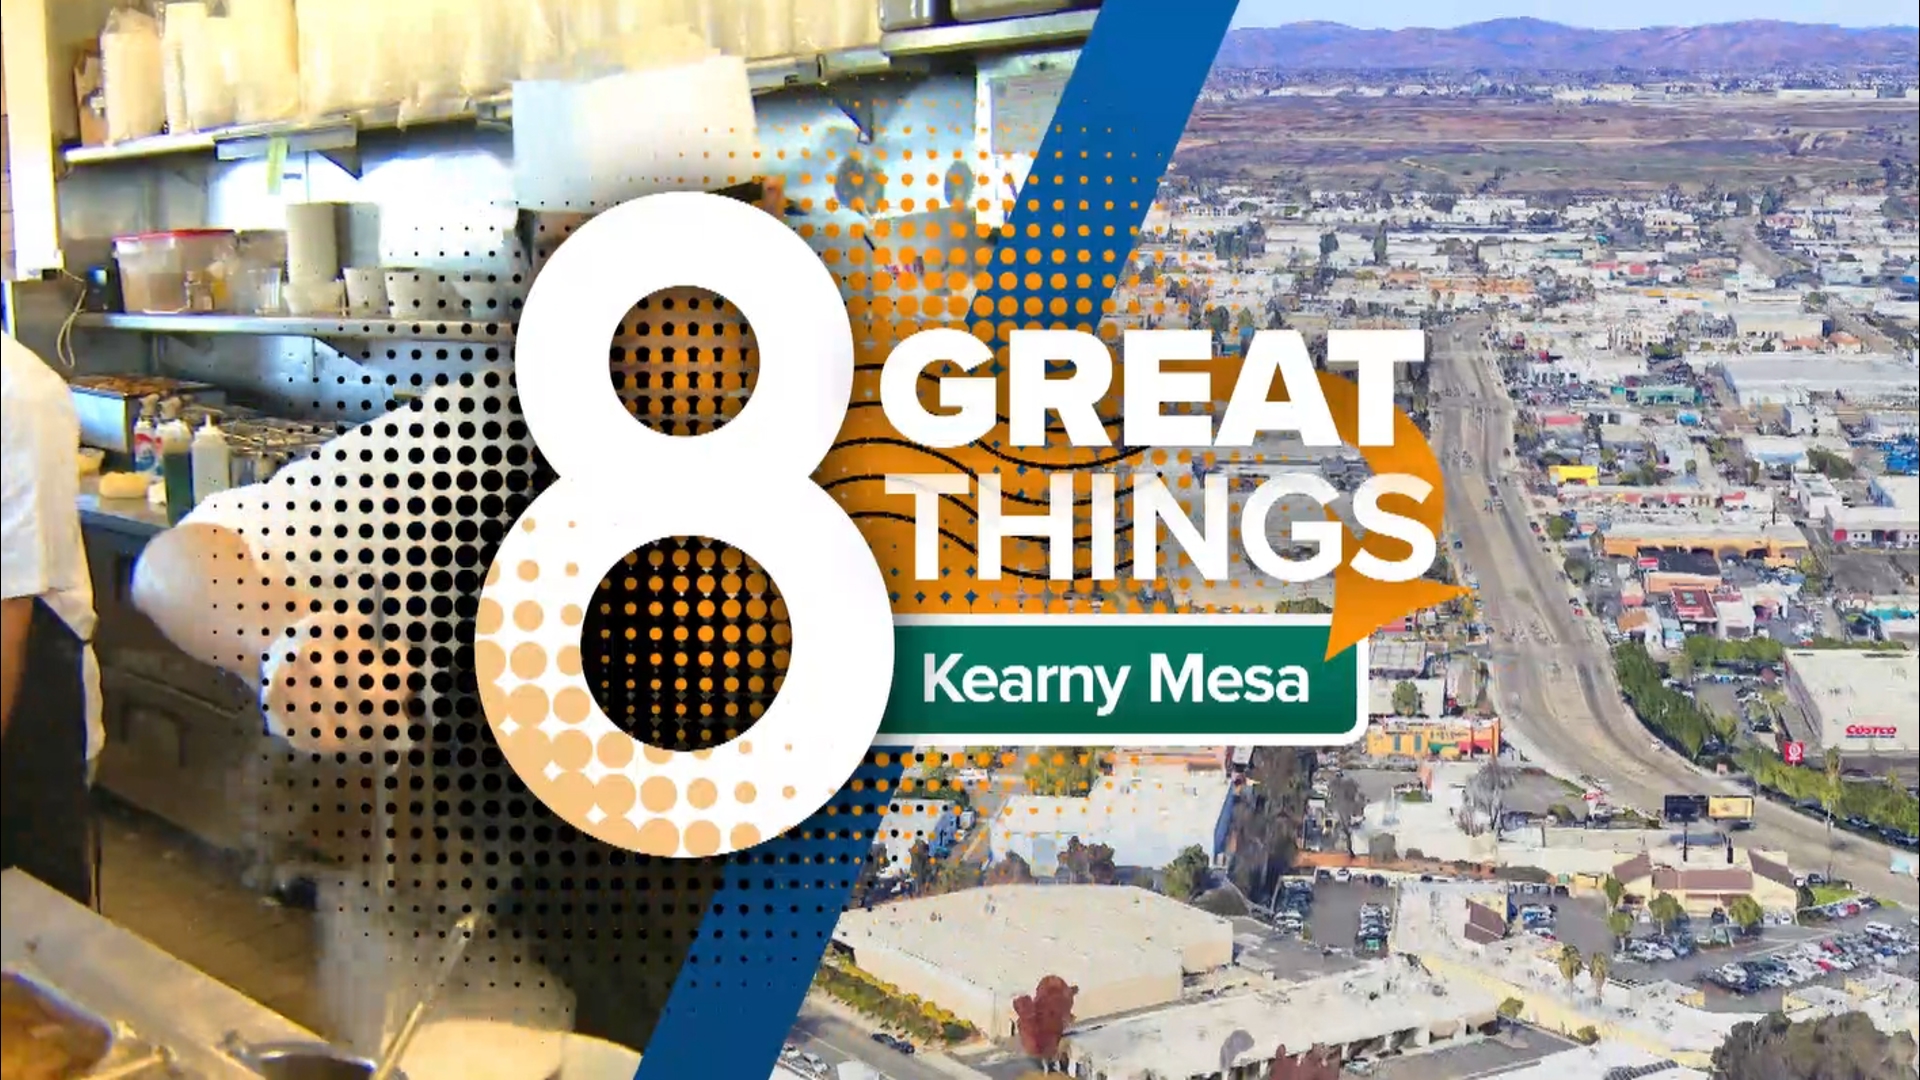 One of our favorite things about CBS 8 being in Kearny Mesa is having access to all of the great food available in the Convoy District.  Here are 8 places to try.